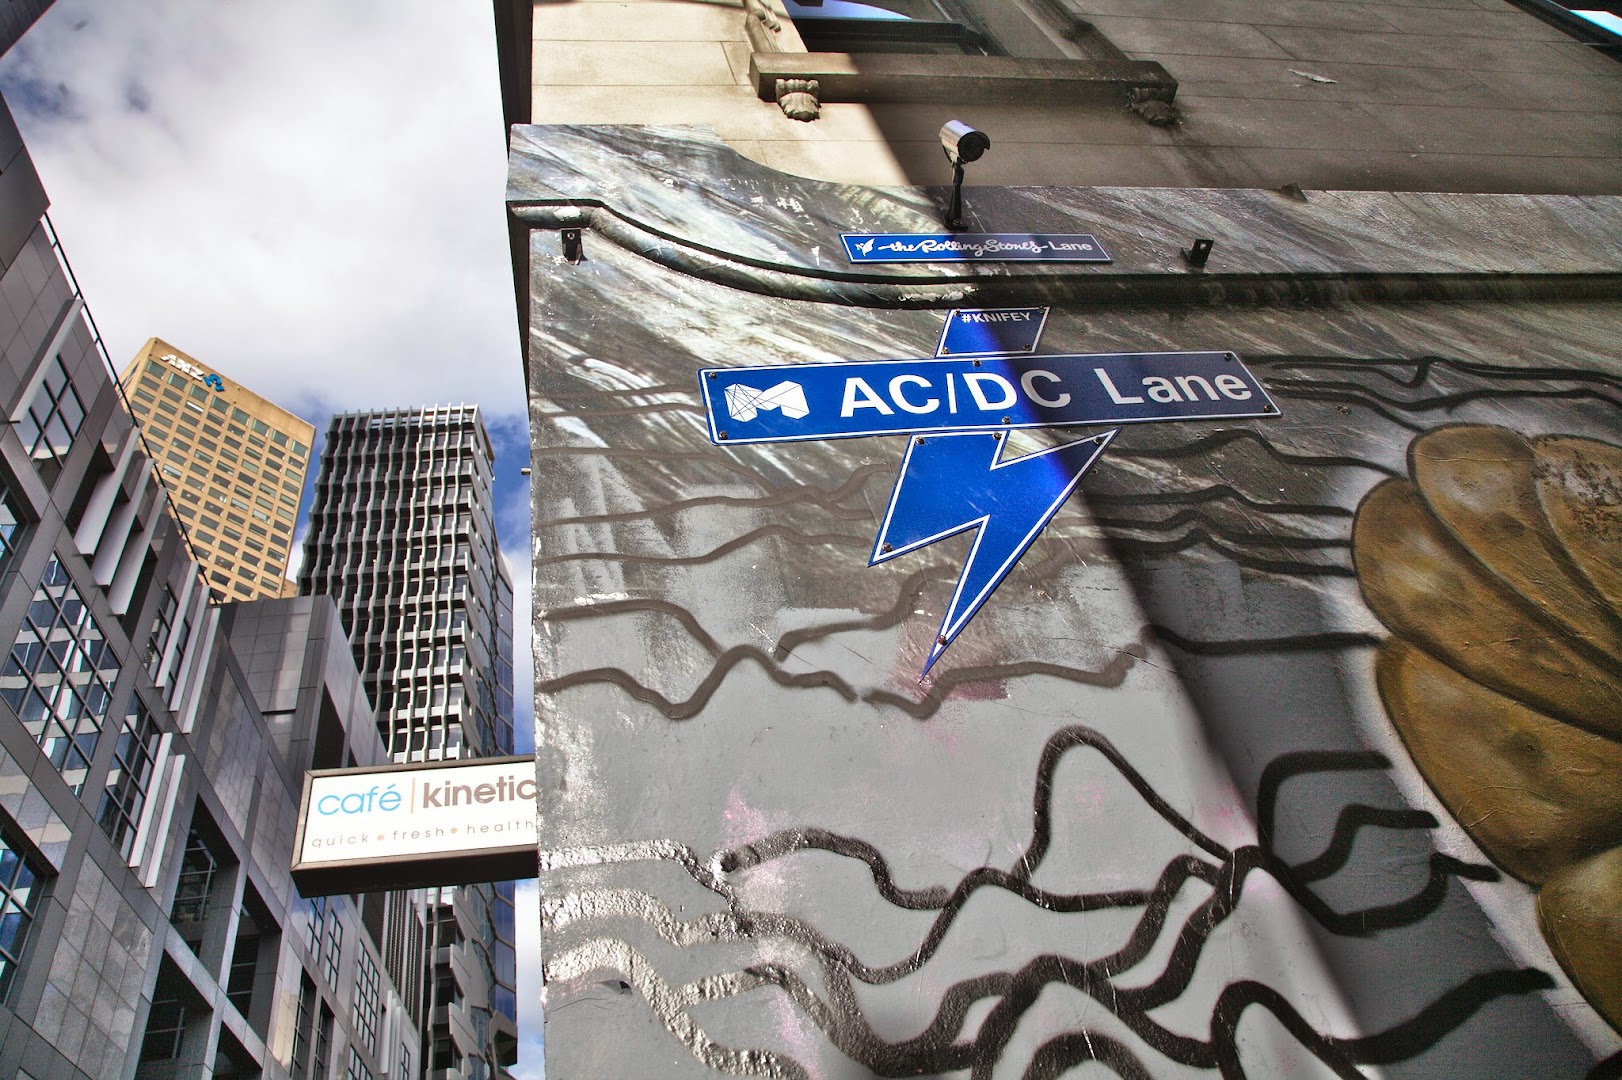 AC/DC have their own lane in Melbourne, although very small